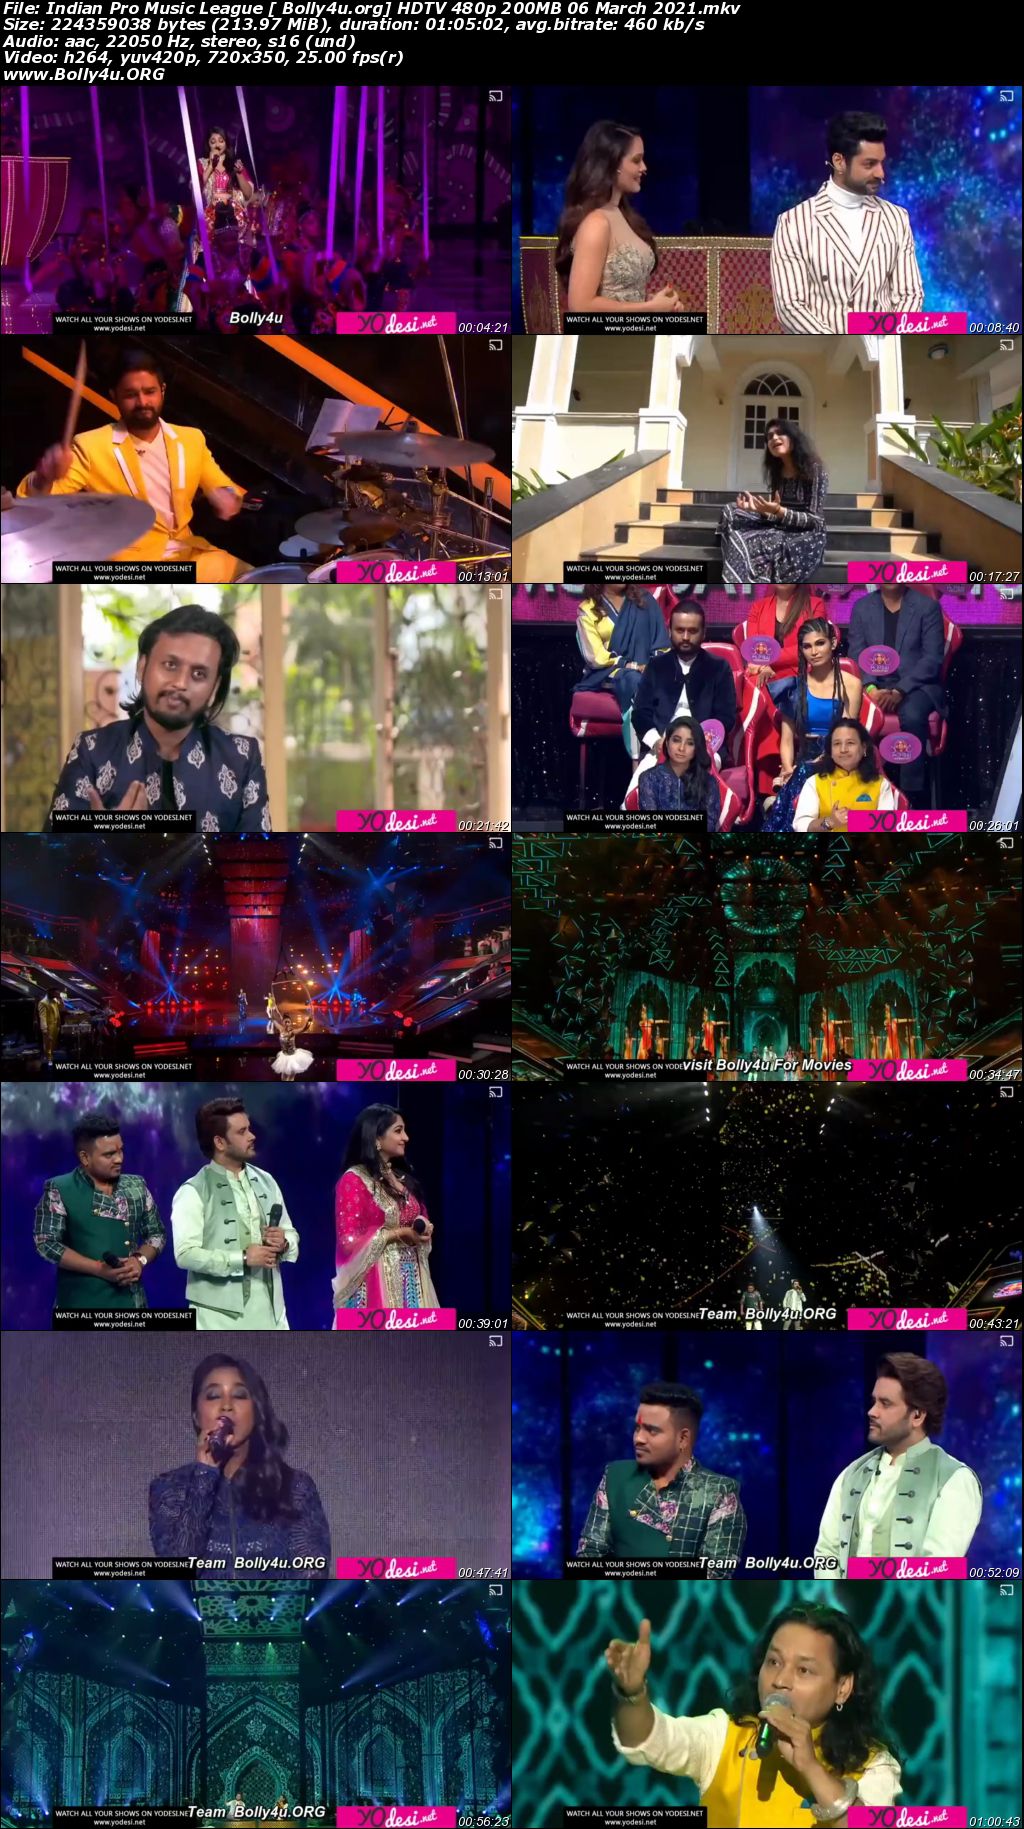 Indian Pro Music League HDTV 480p 200MB 06 March 2021 Download